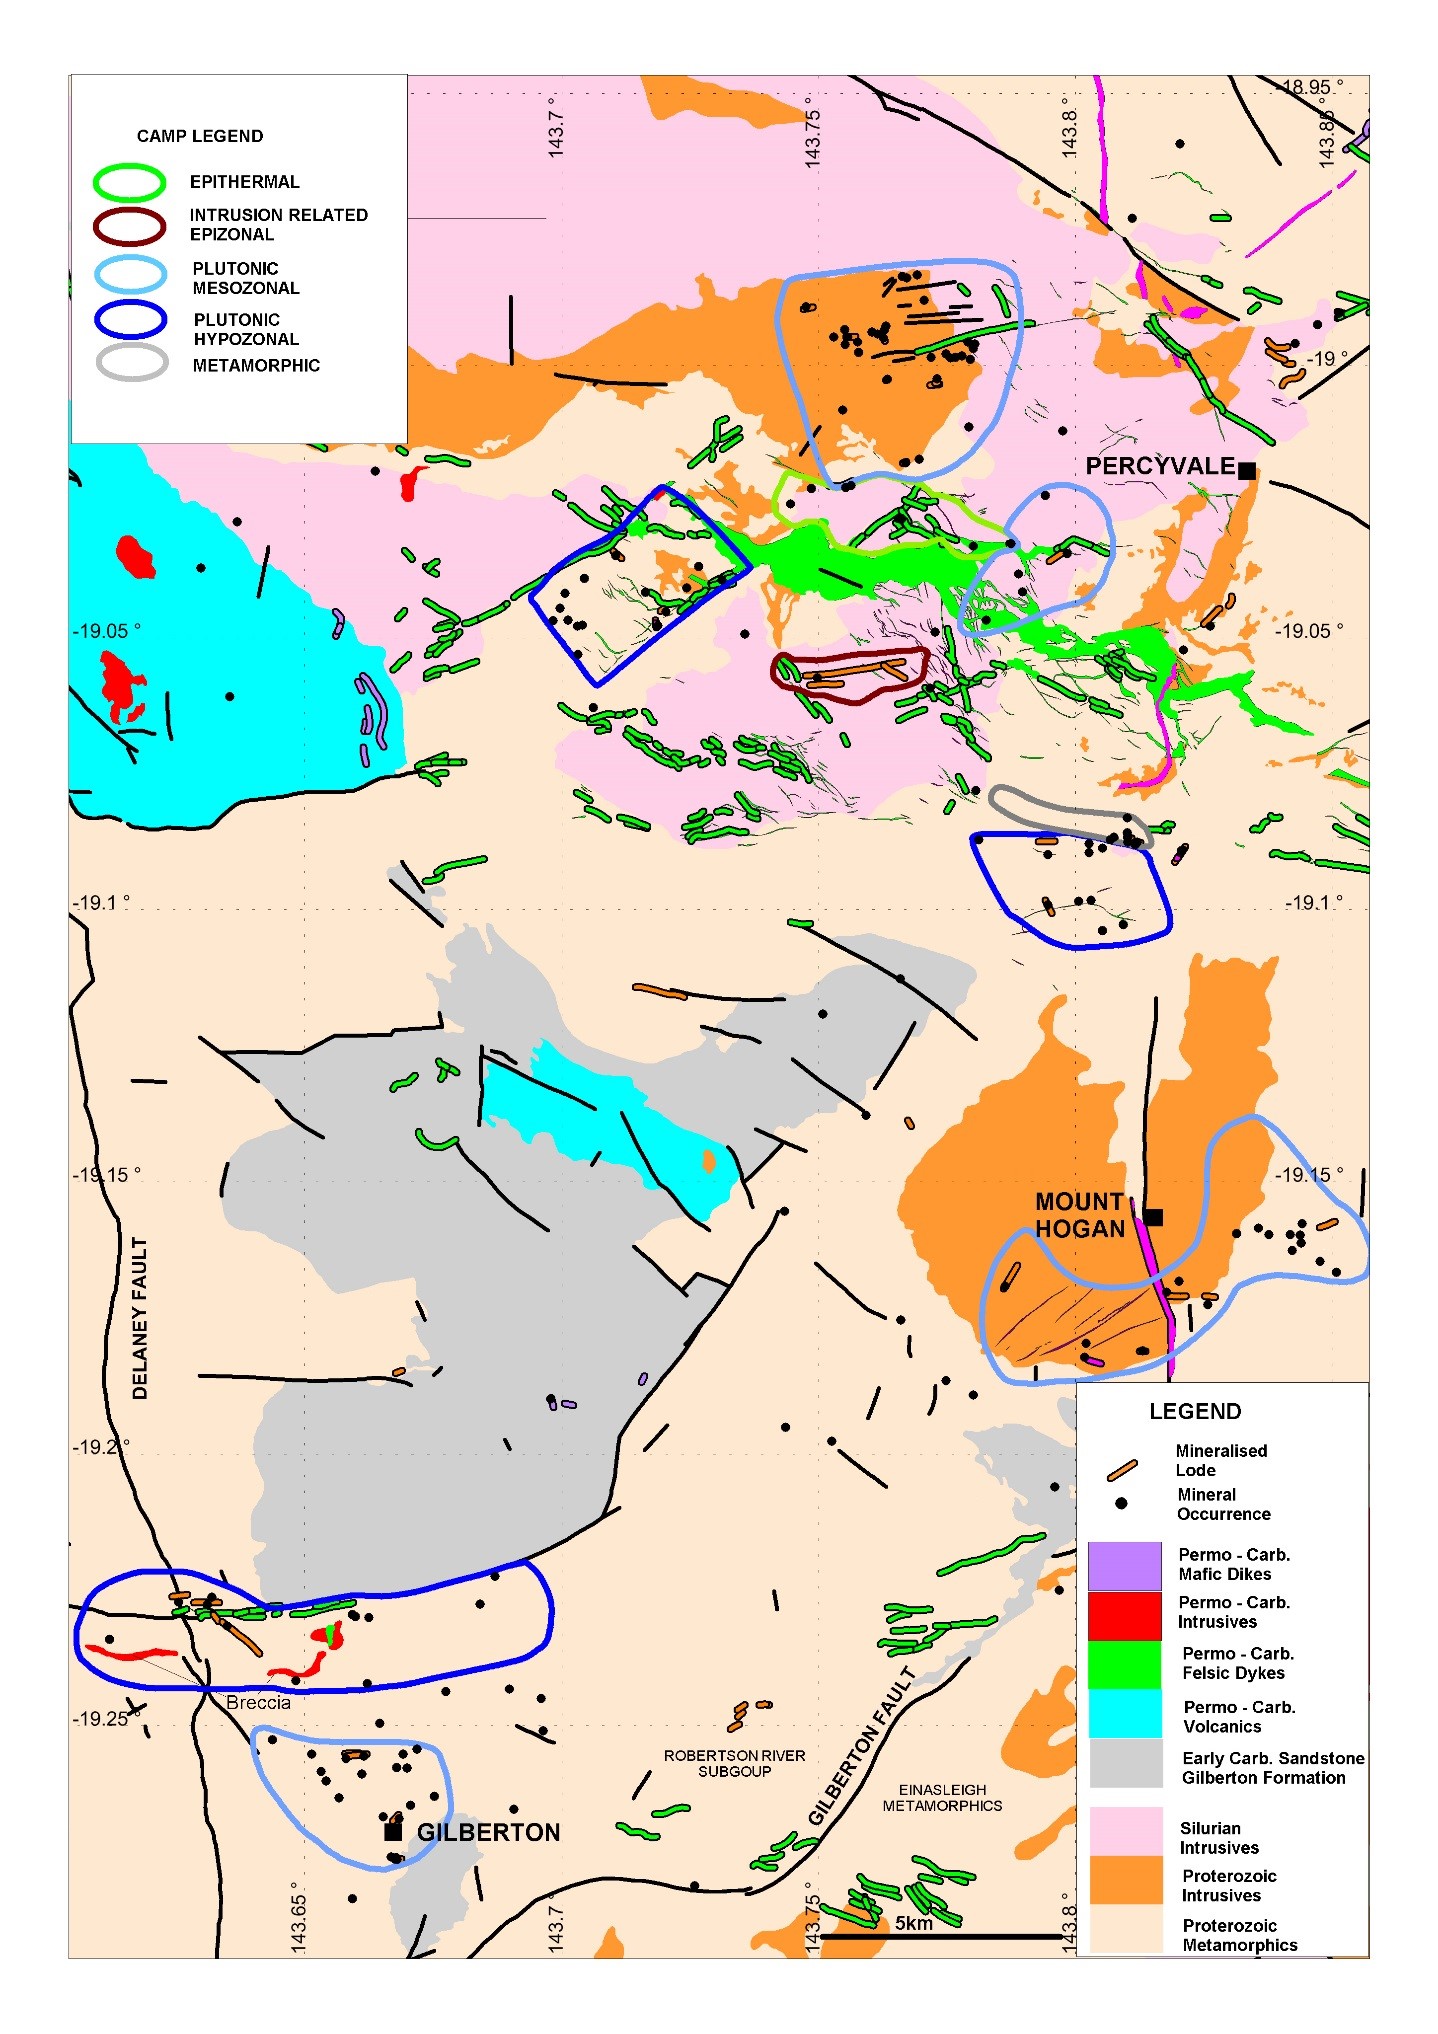 FIGURE 14 : Gilberton District simplified geology showing metallogenic camps, mineral occurrences and major structures.